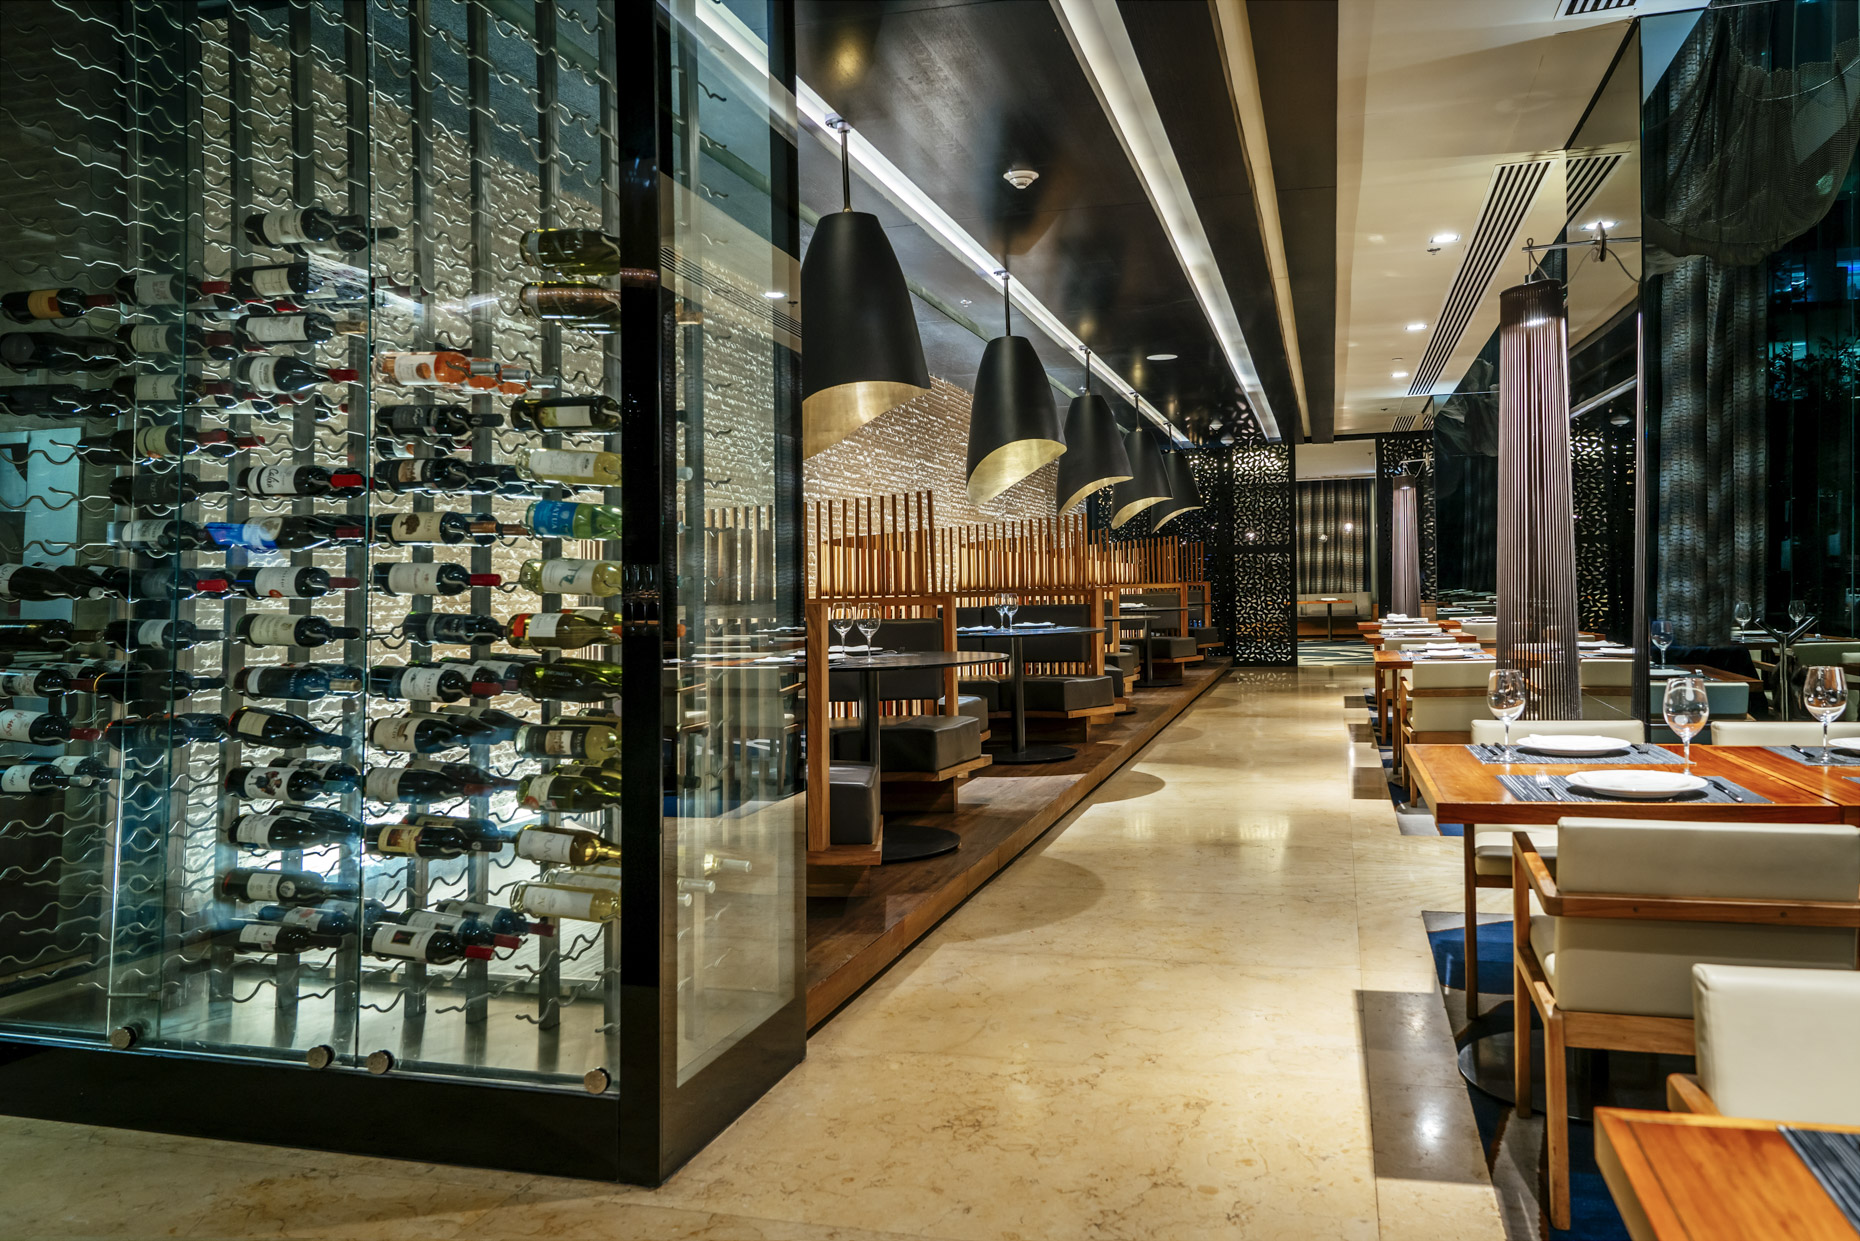 Hilton high end restaurant with glass wine case